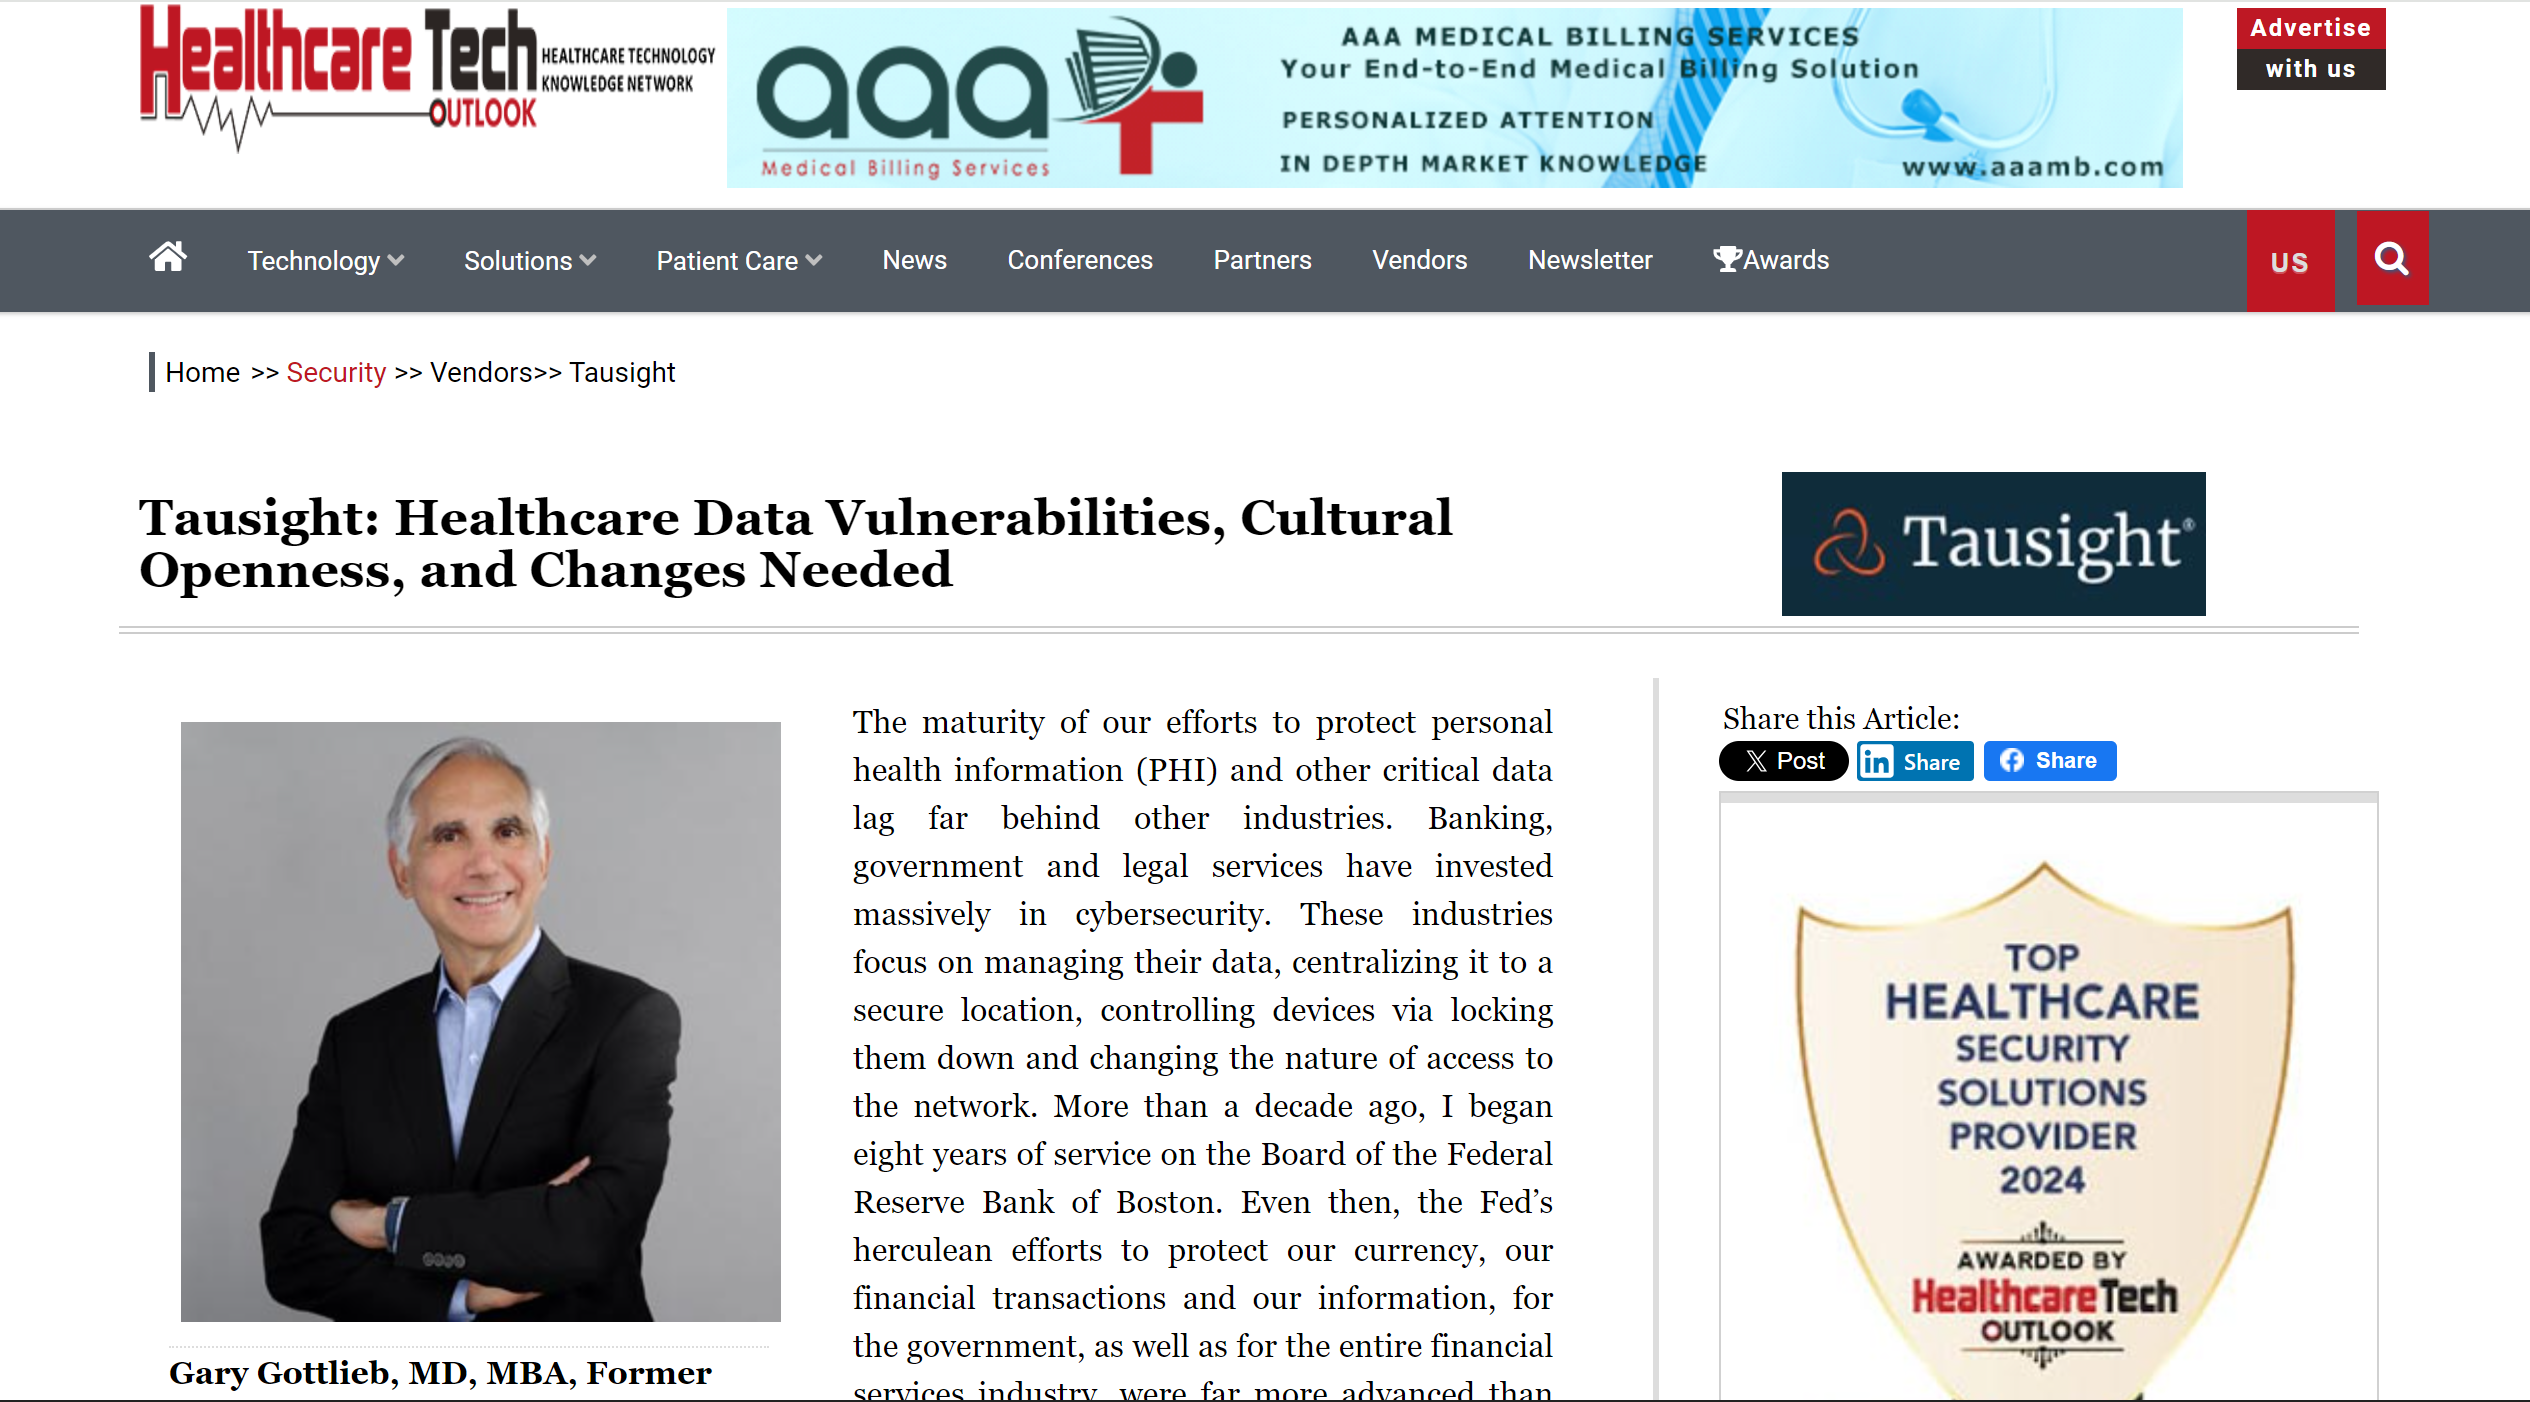 Healthcare Tech Outlook Dr. Gary Gottlieb contributory article: Healthcare Data Vulnerabilities, Cultural Openness, and Changes Needed